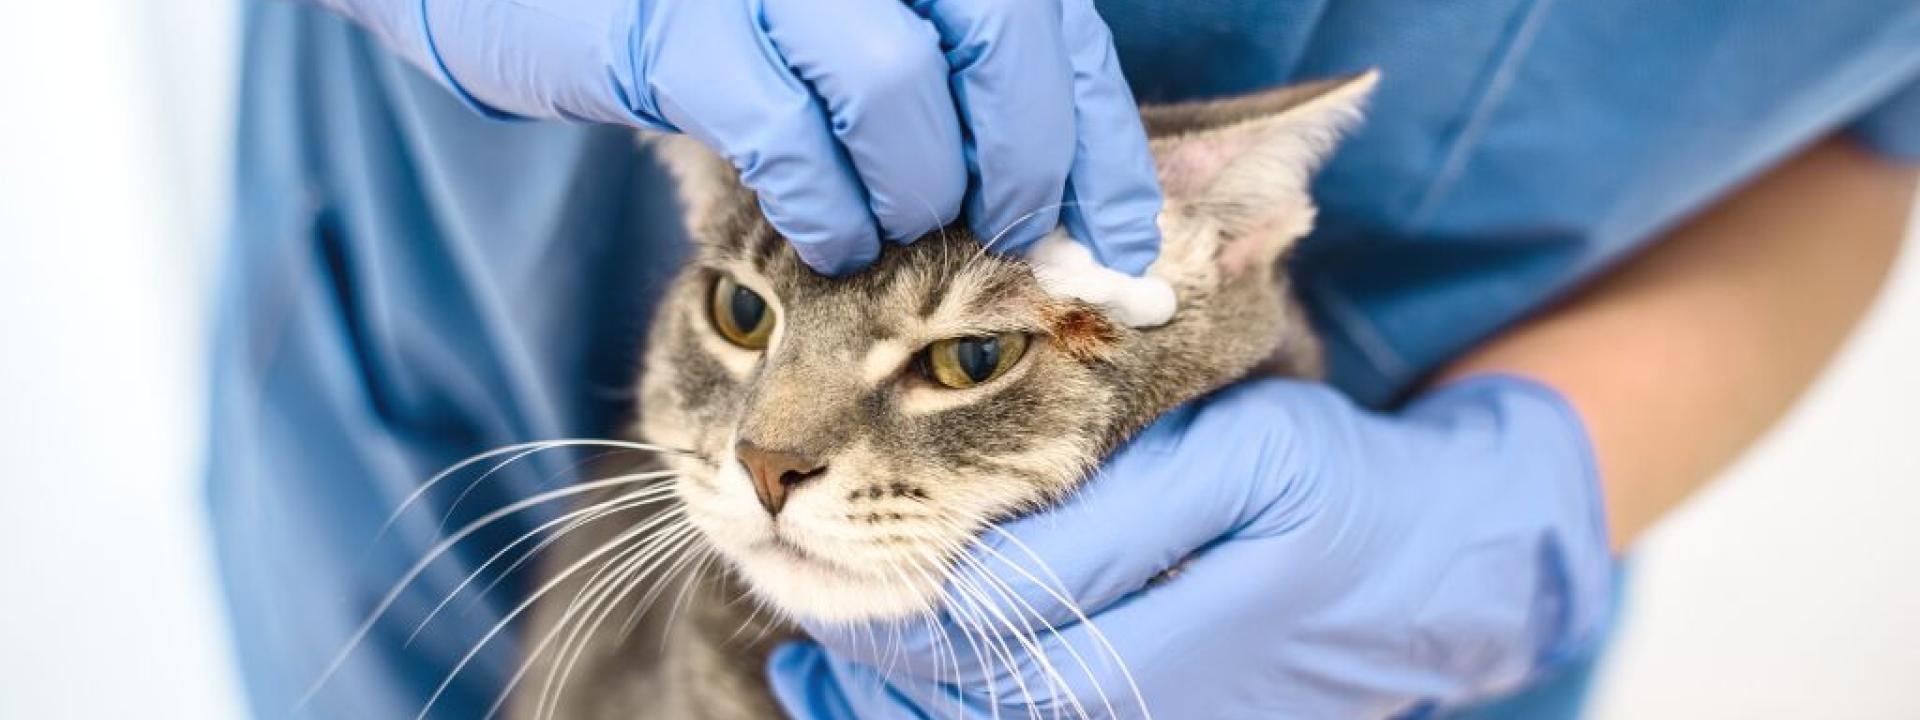 Veterinarian disinfecting the irritated skin of a cat